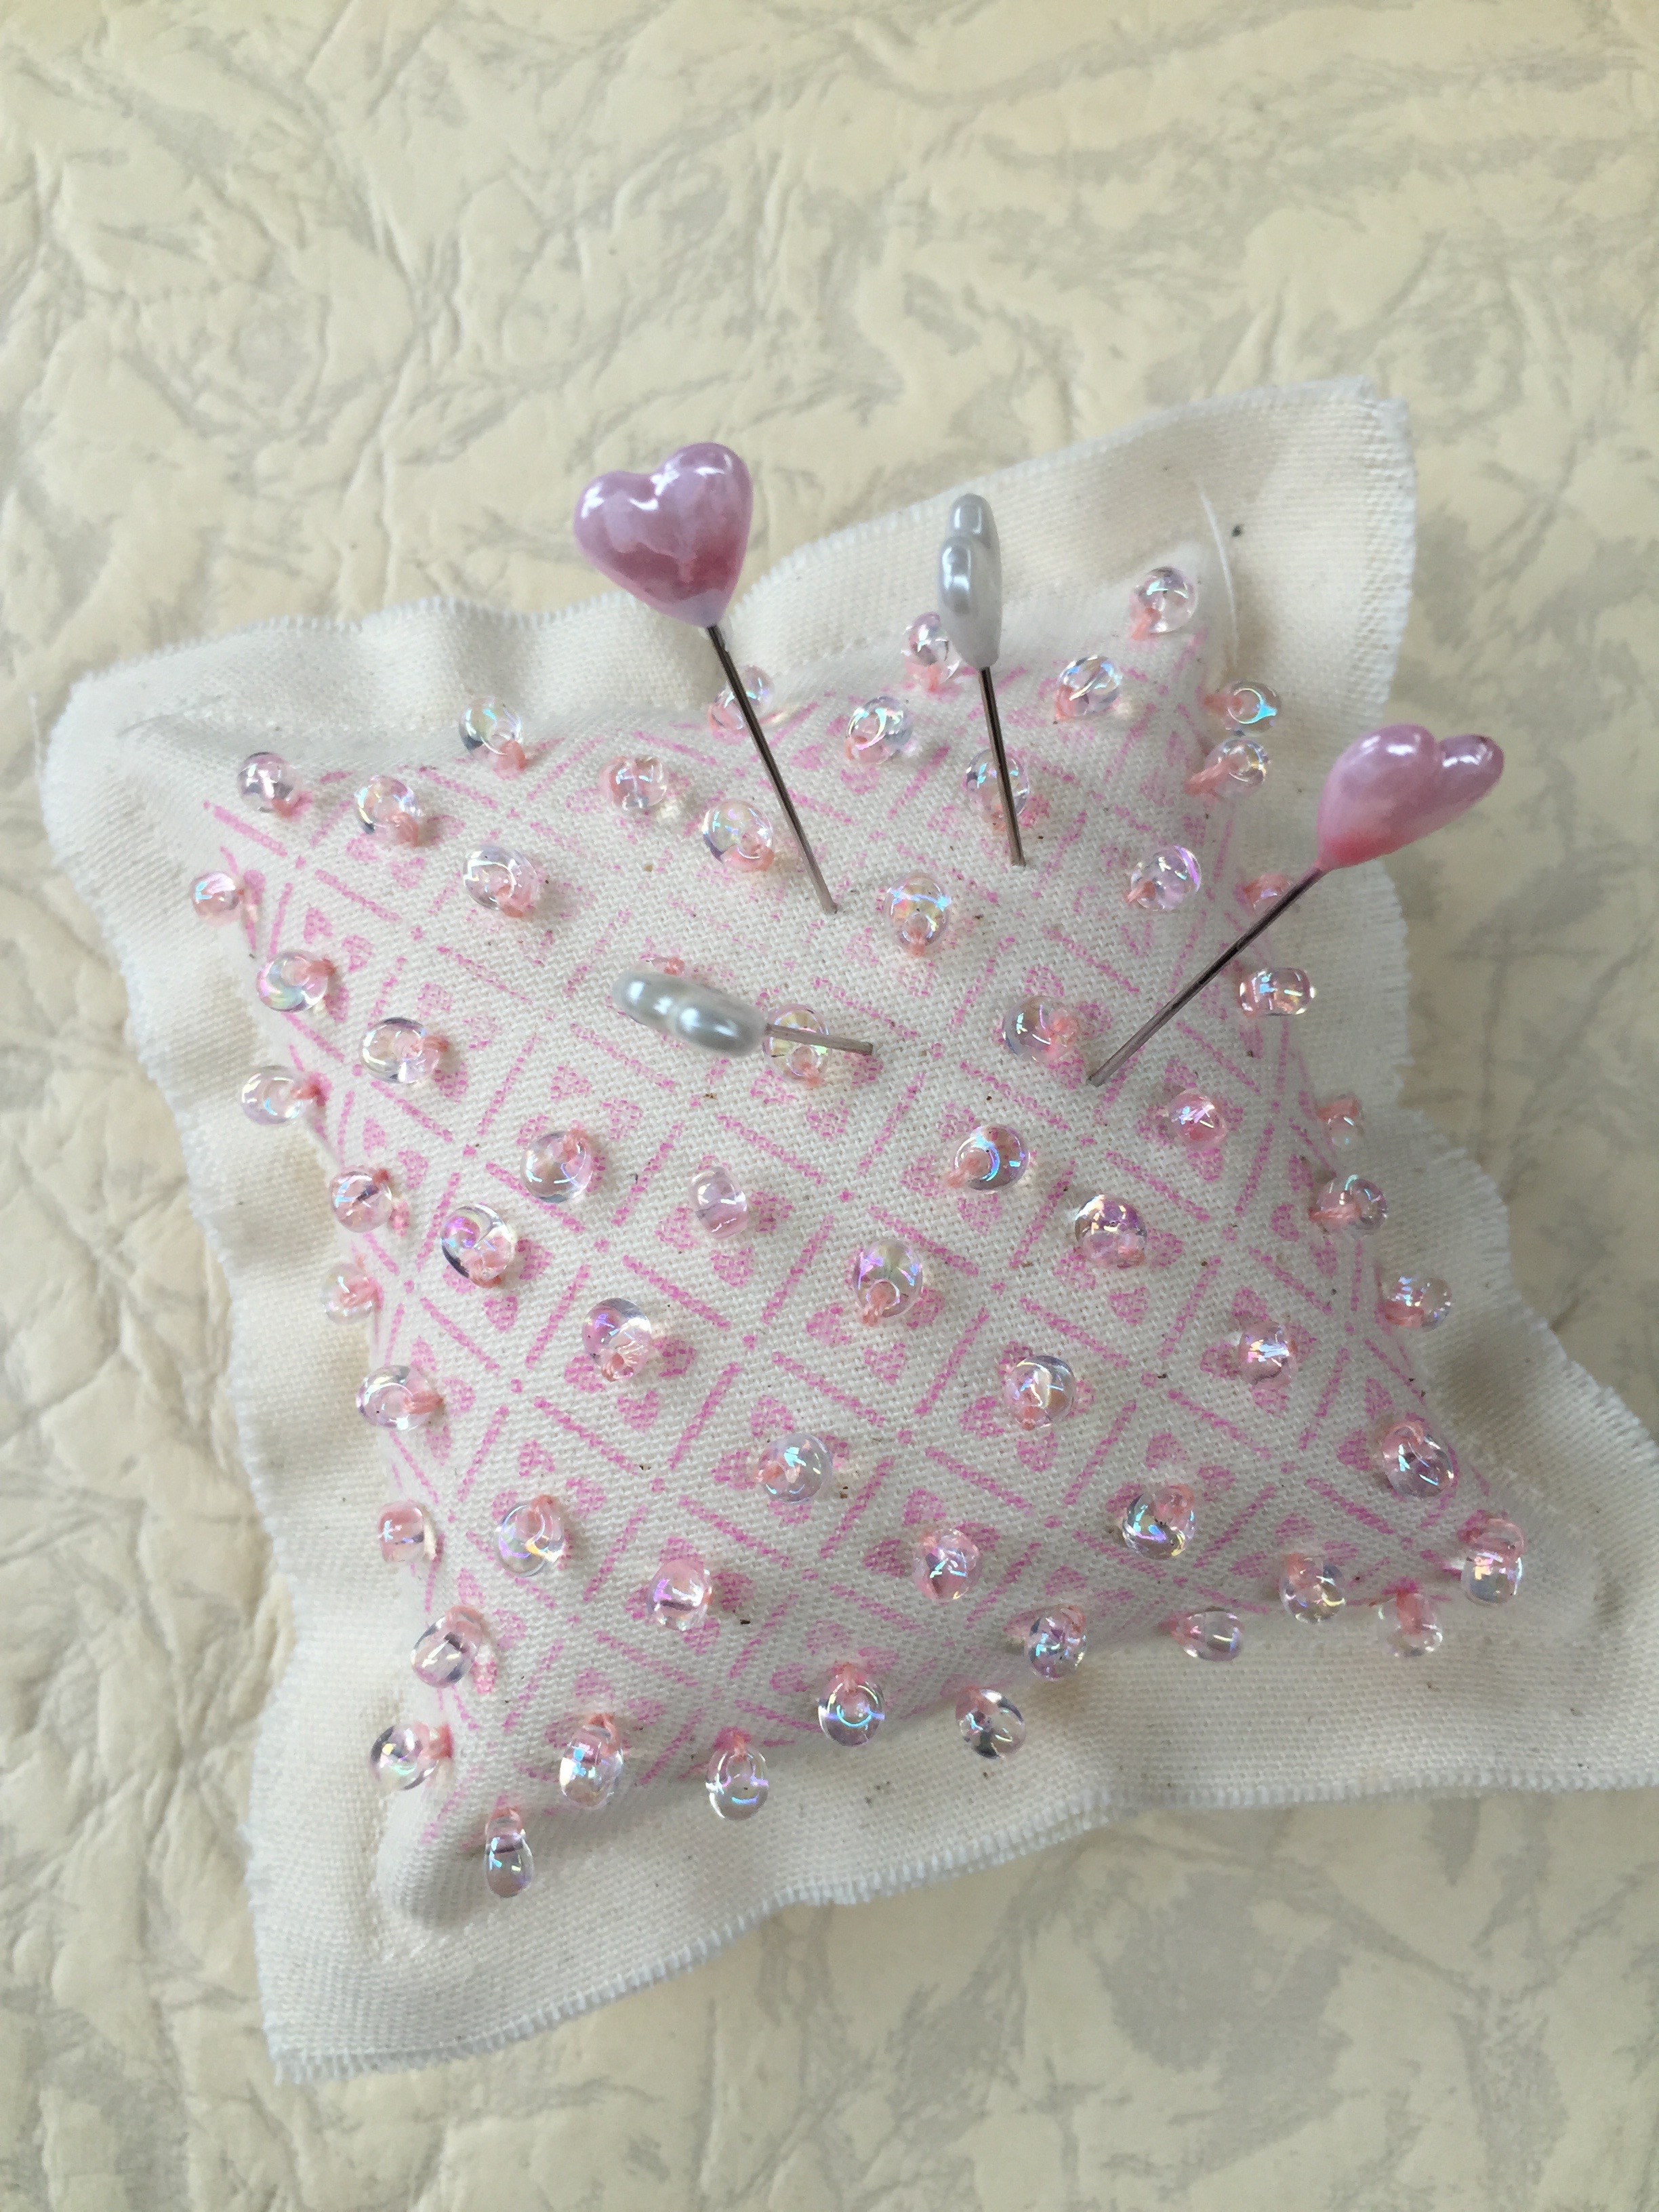 Stamped and Beaded Pretty Little Pincushion